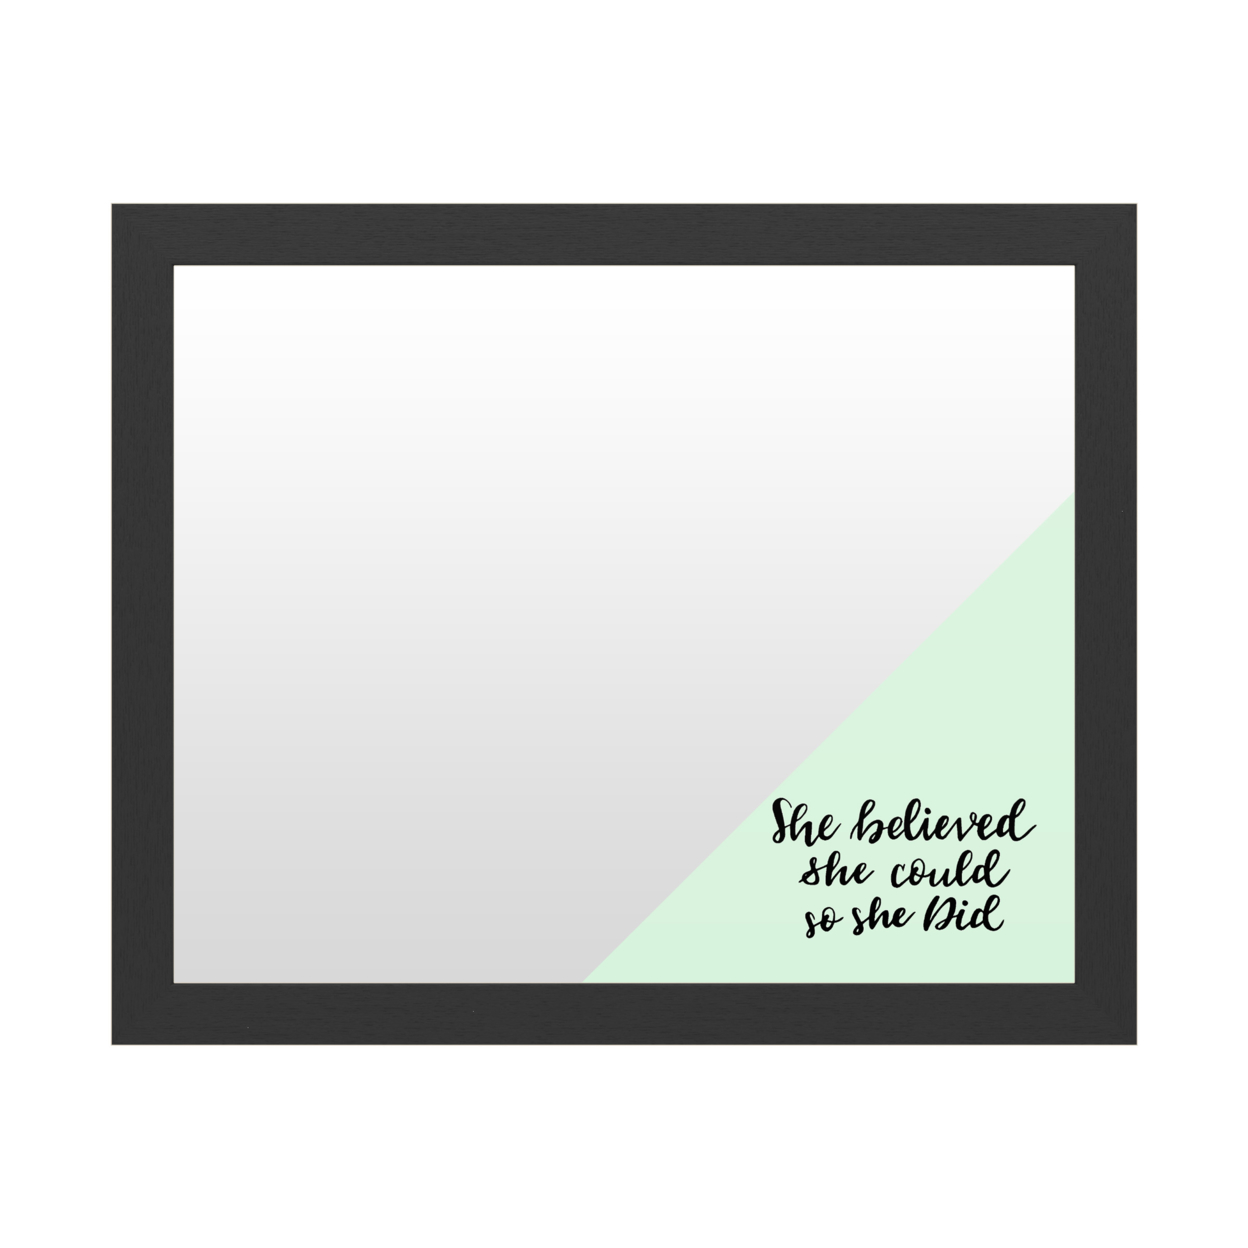 Dry Erase 16 X 20 Marker Board With Printed Artwork - She Believed She Could Green White Board - Ready To Hang